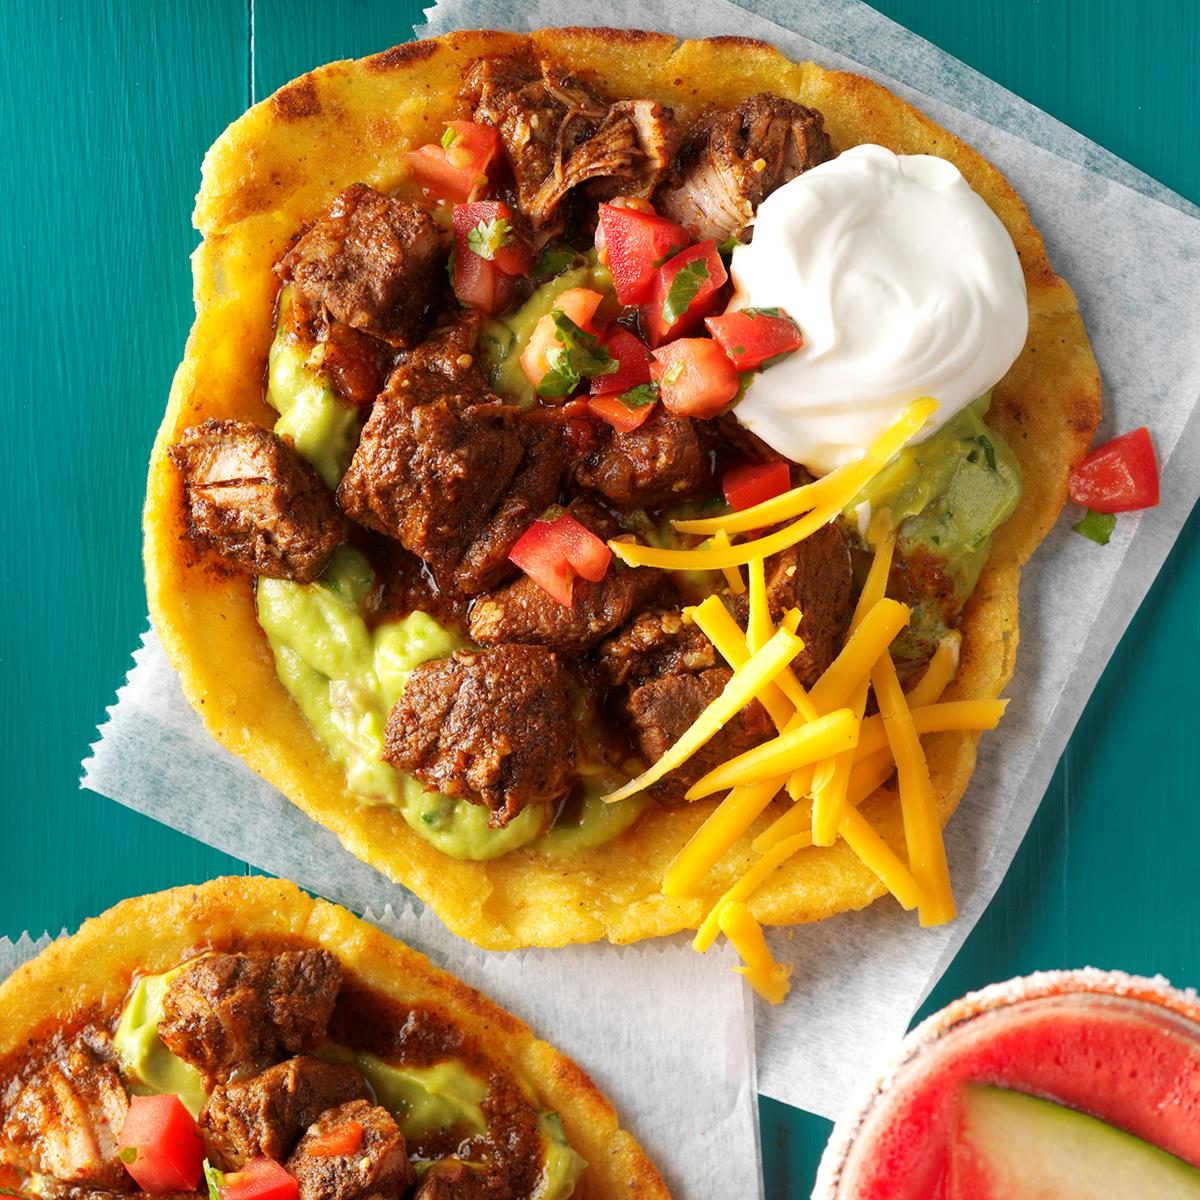 Carne Adovada Sopes Recipe: How to Make It | Taste of Home